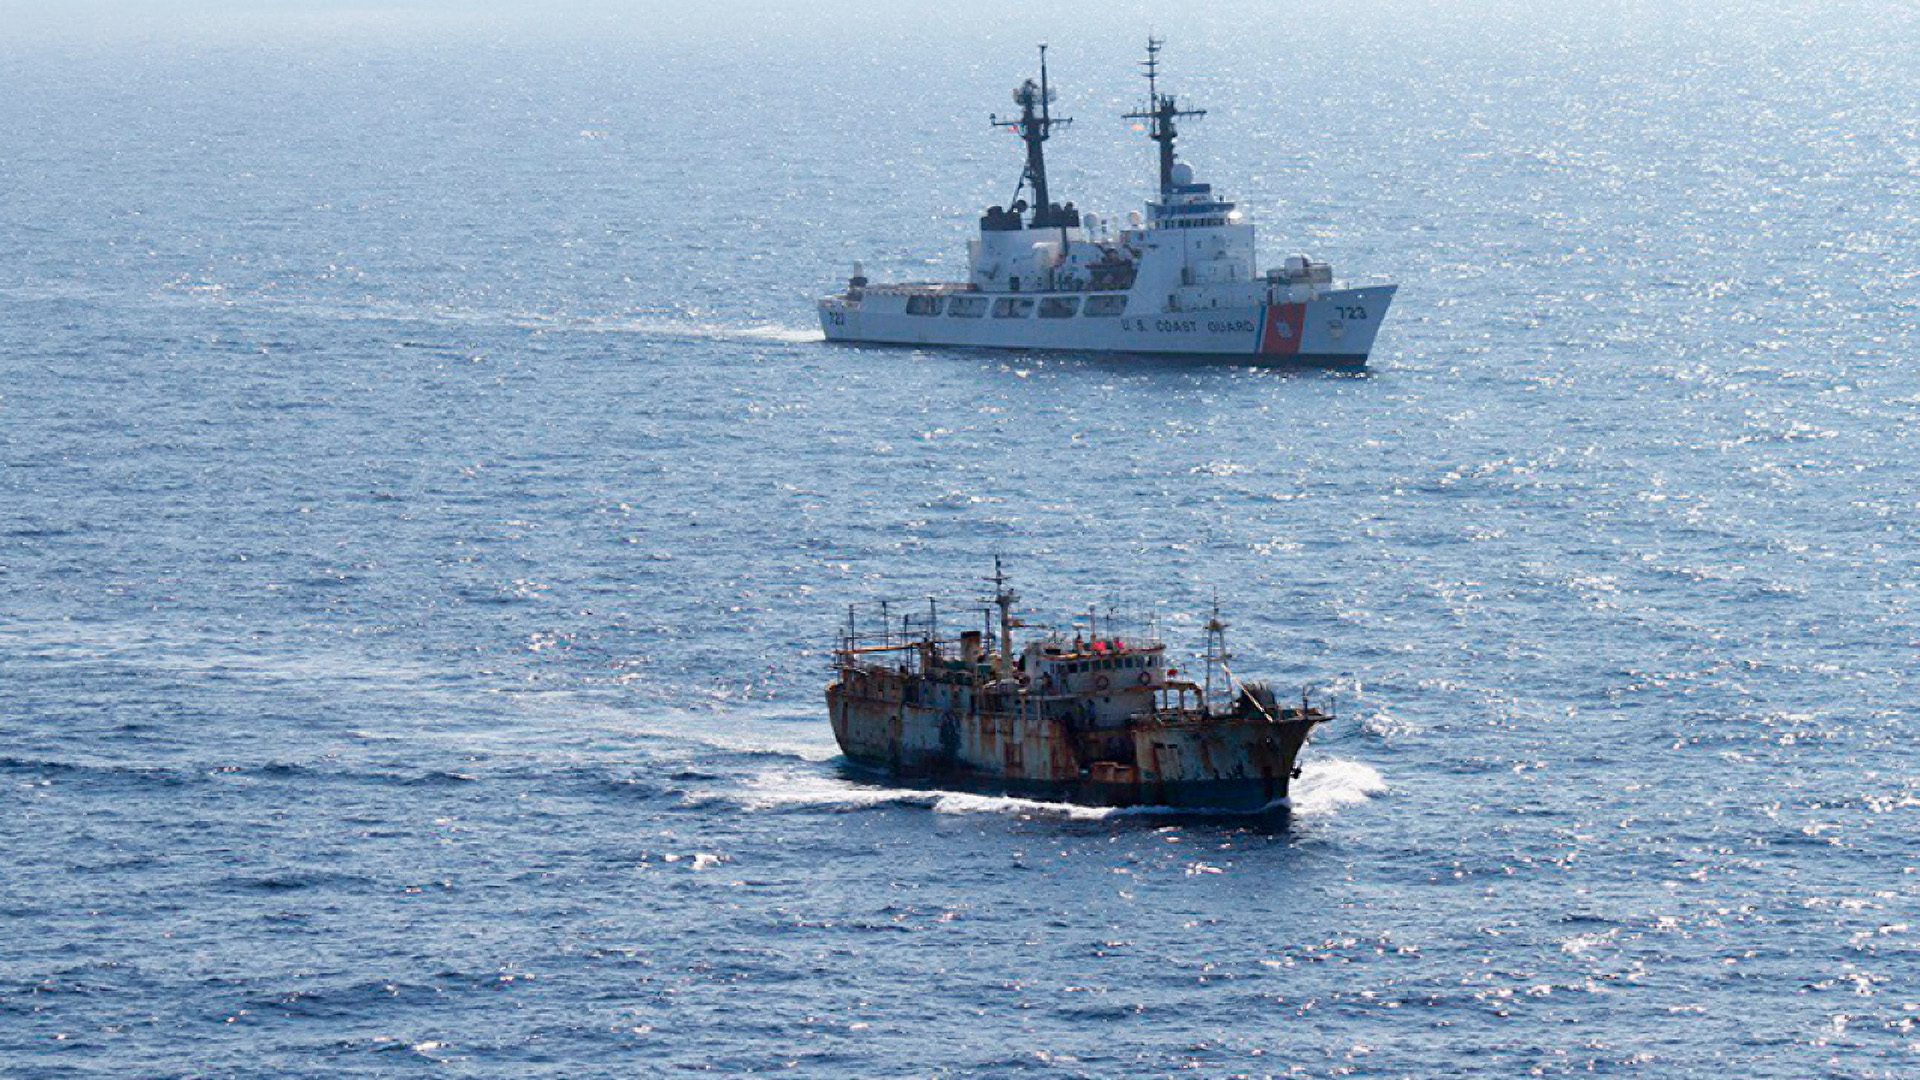 The crew of the Coast Guard Cutter Rush escorts the vessel Da Cheng, suspected of high seas drift net fishing, in the North Pacific Ocean on August 14, 2012. (Image credit: U.S. Coast Guard)